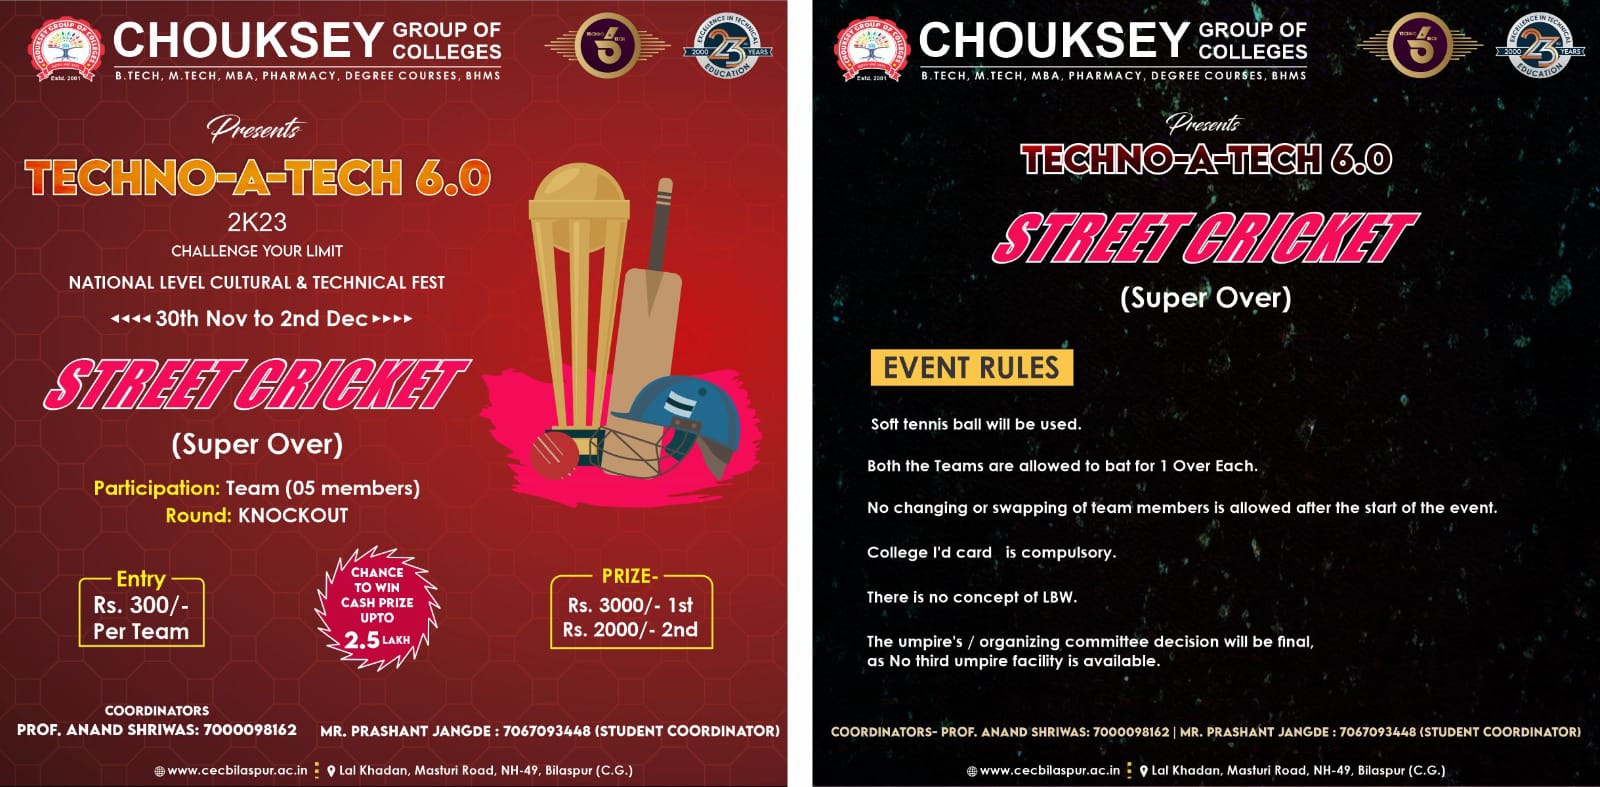 Cricket knockout rules